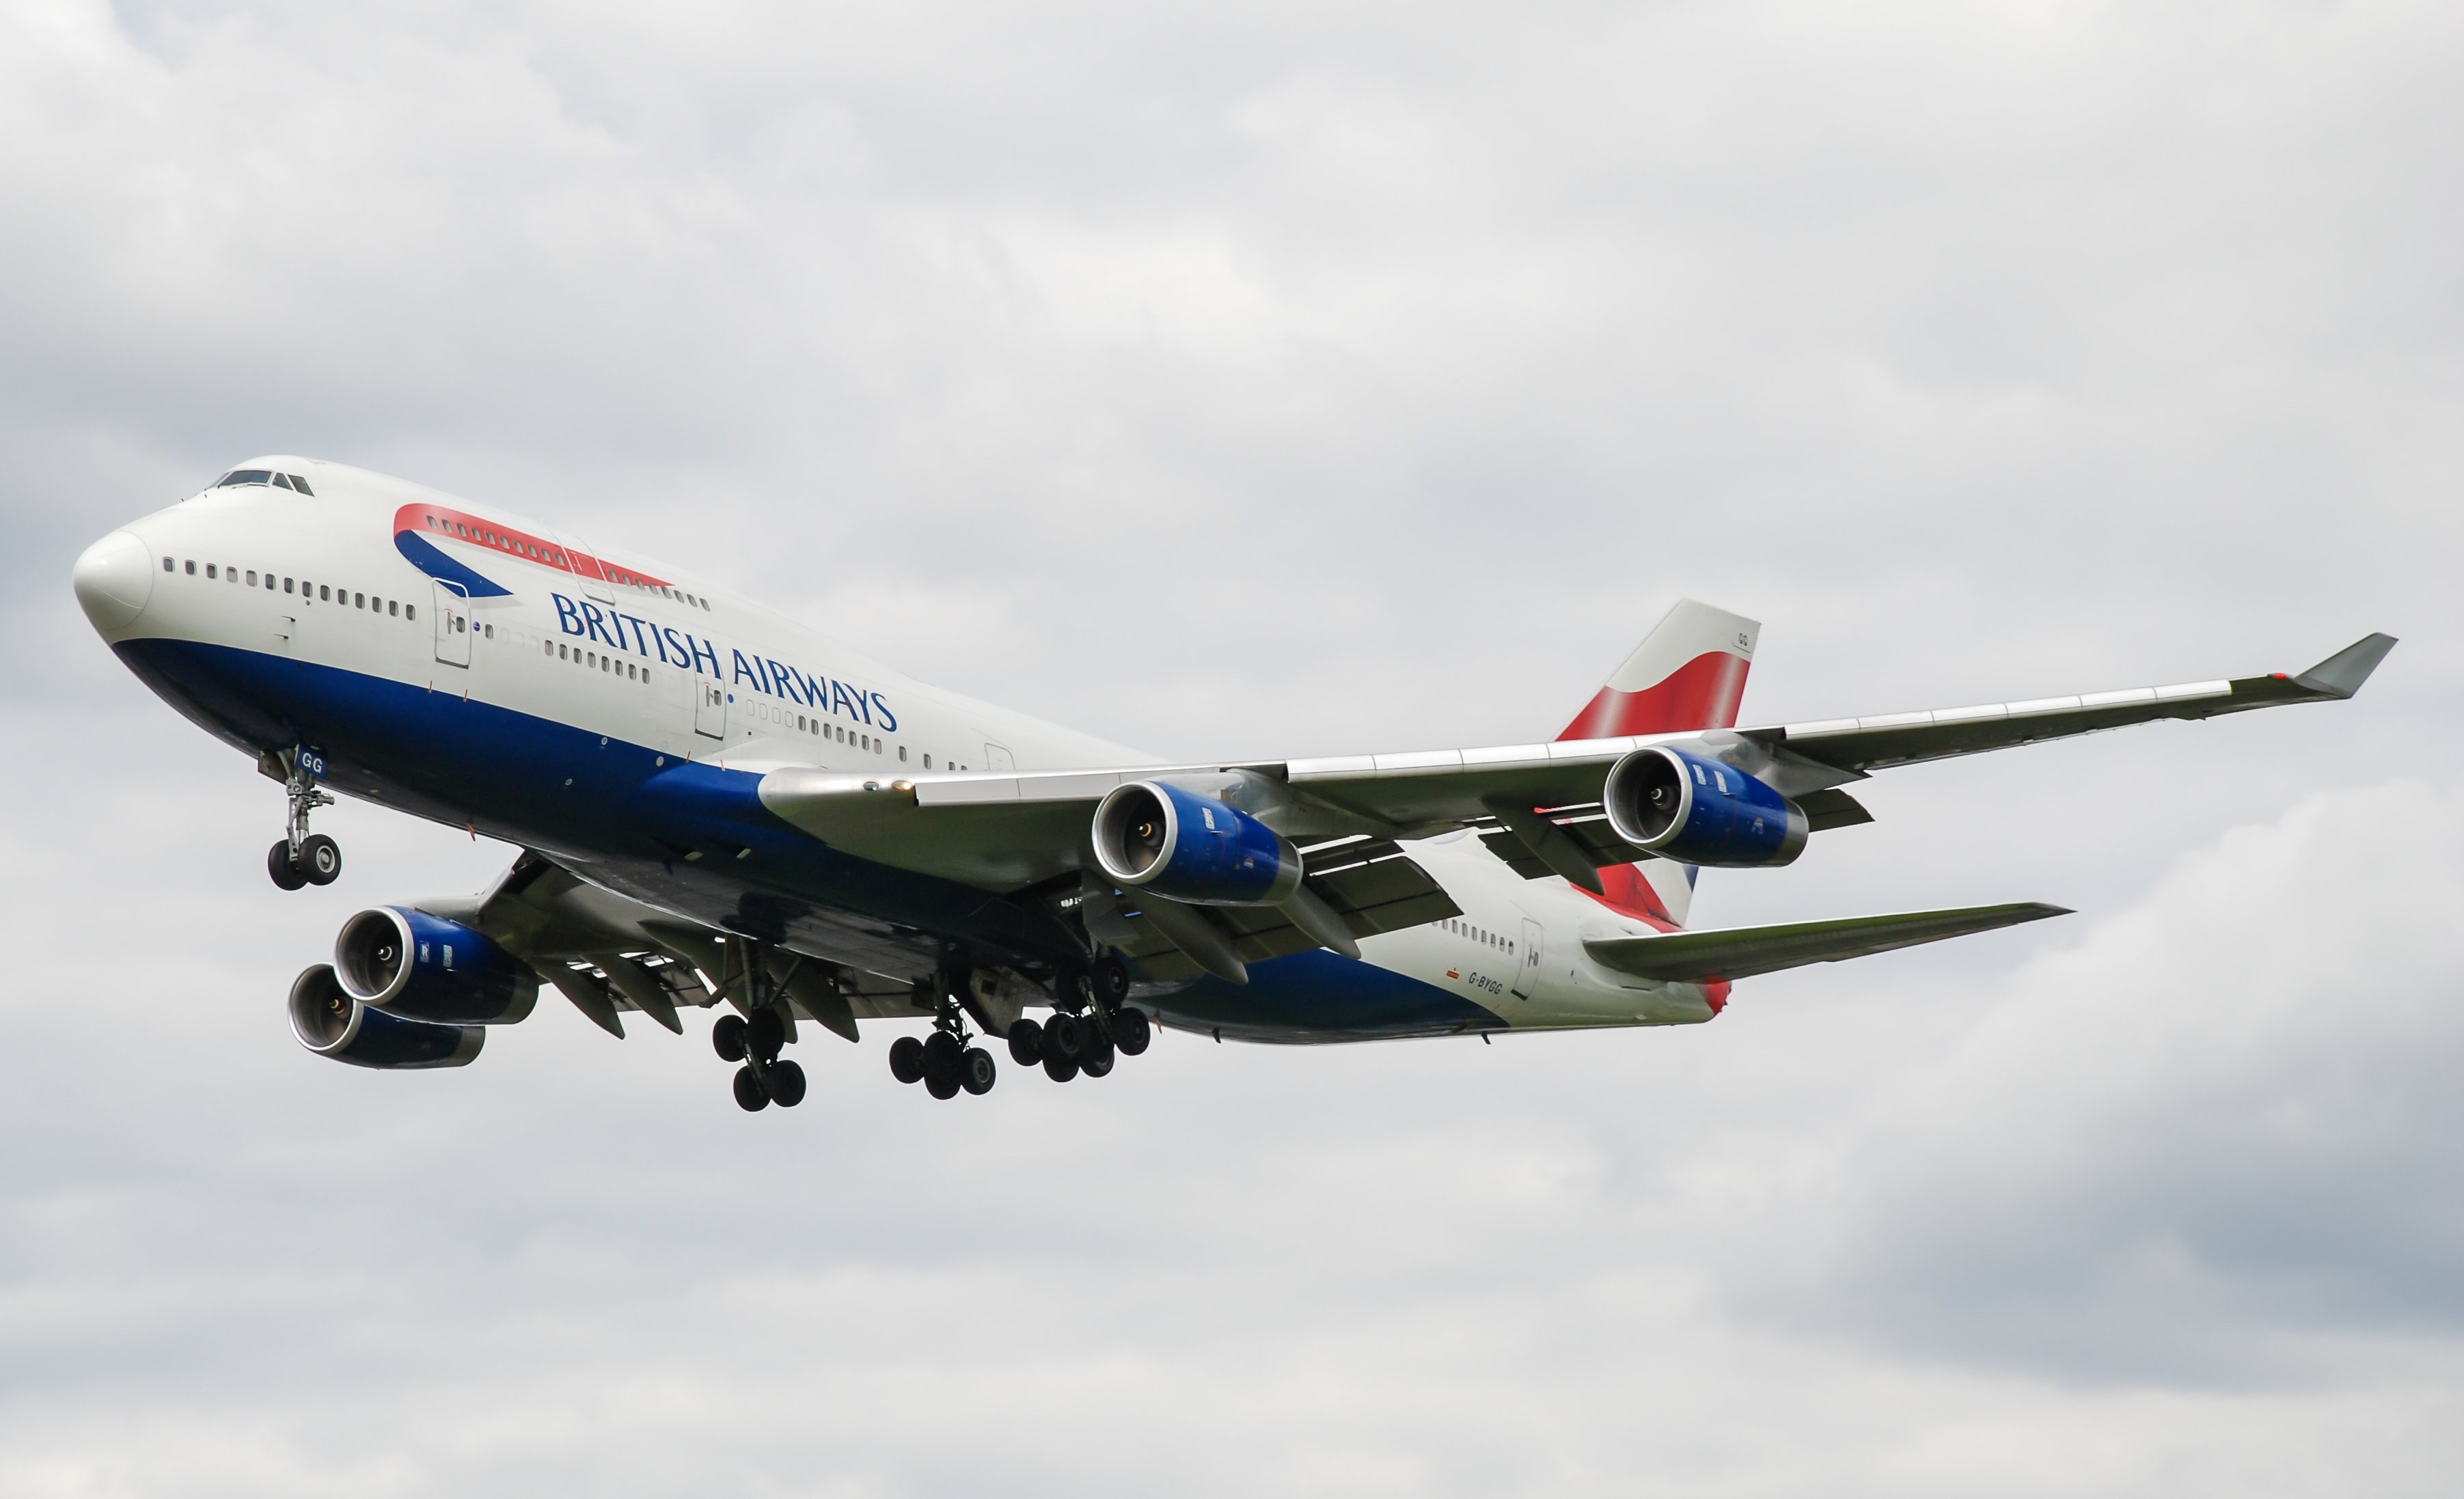 G-BYGG/GBYGG Withdrawn from use Boeing 747 Airframe Information - AVSpotters.com